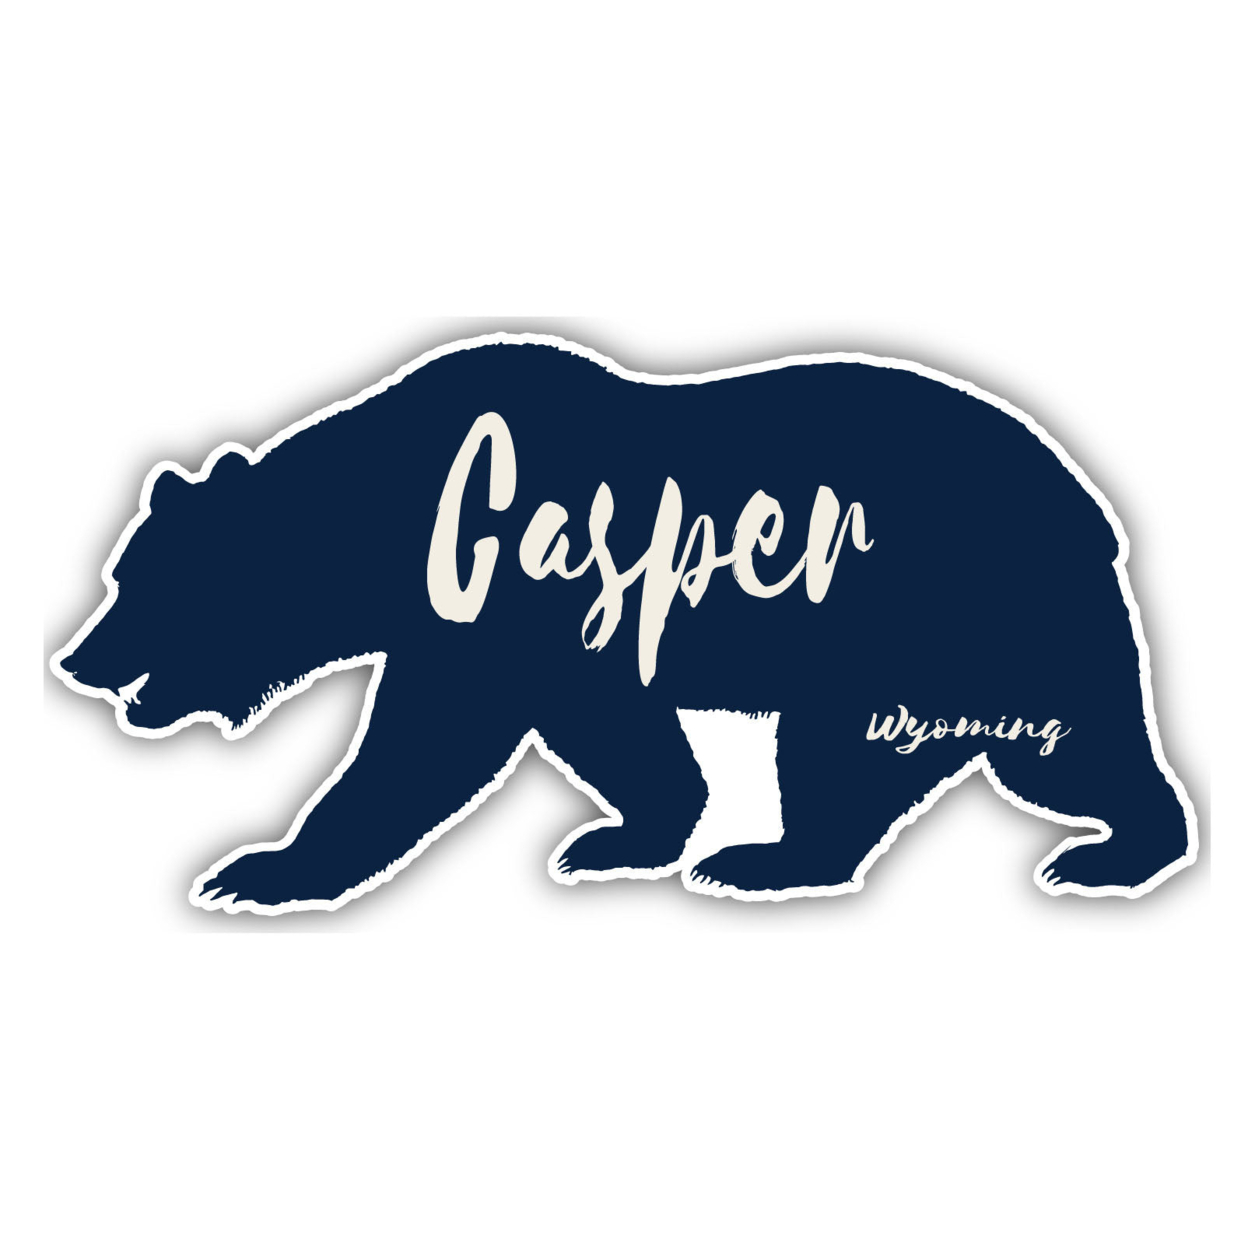 Casper Wyoming Souvenir Decorative Stickers (Choose Theme And Size) - 4-Pack, 6-Inch, Camp Life